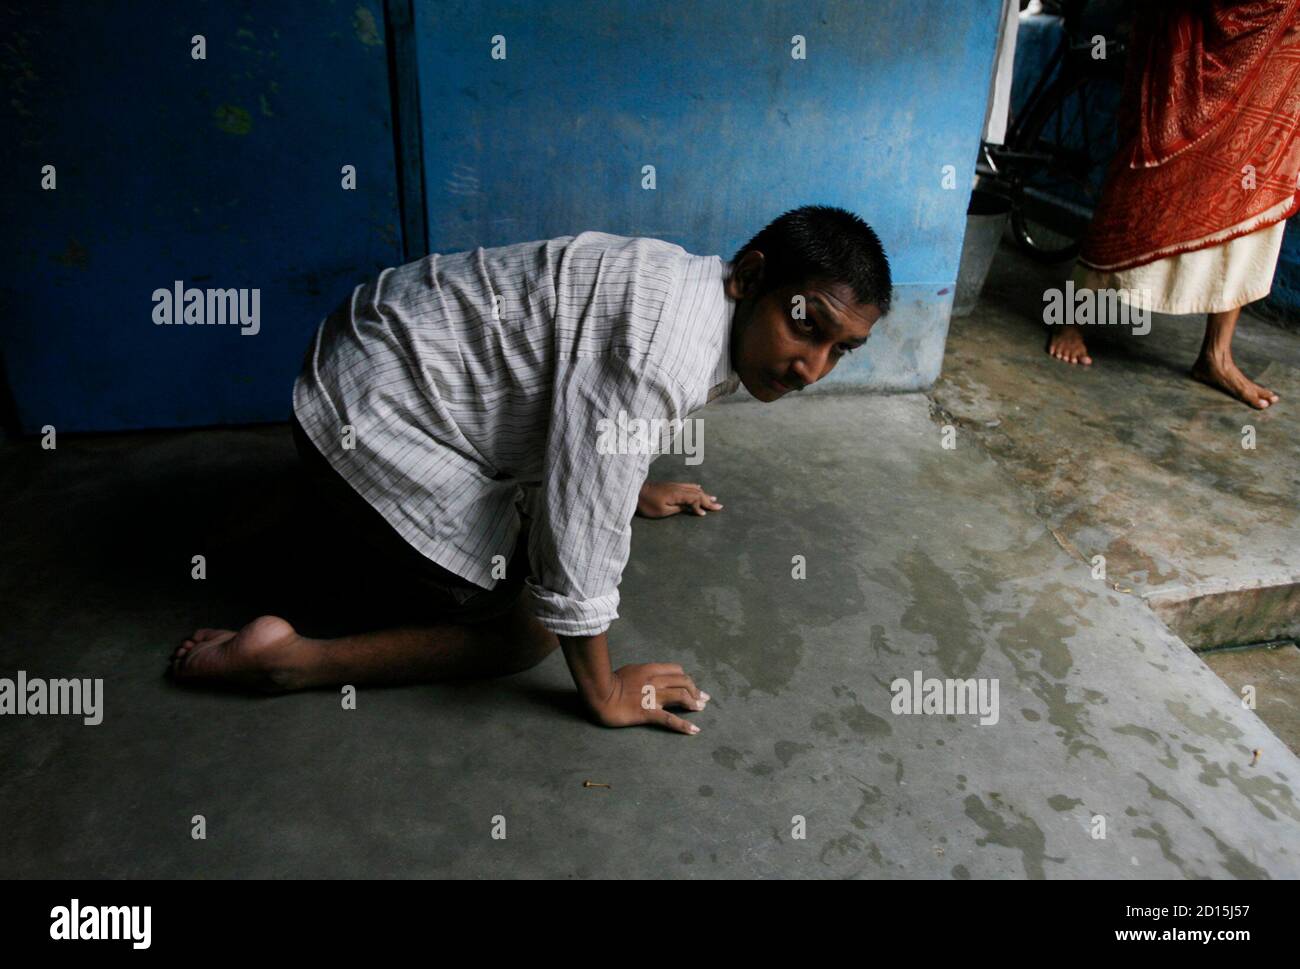 Chhatu Sha, 21, who is suffering from polio, crawls inside his house in the northeastern Indian city of Siliguri June 21, 2008. India has recorded the second highest number of polio cases in the world this year, with 268 cases so far, against 272 in Nigeria, according to the latest World Health Organization data. Polio, which is incurable, leads to paralysis, and death occurs in about 5-10 percent of patients. The virus is transmitted through the faecal-oral route in unhygienic conditions if food is eaten with unwashed hands. REUTERS/Rupak De Chowdhuri (INDIA) Stock Photo